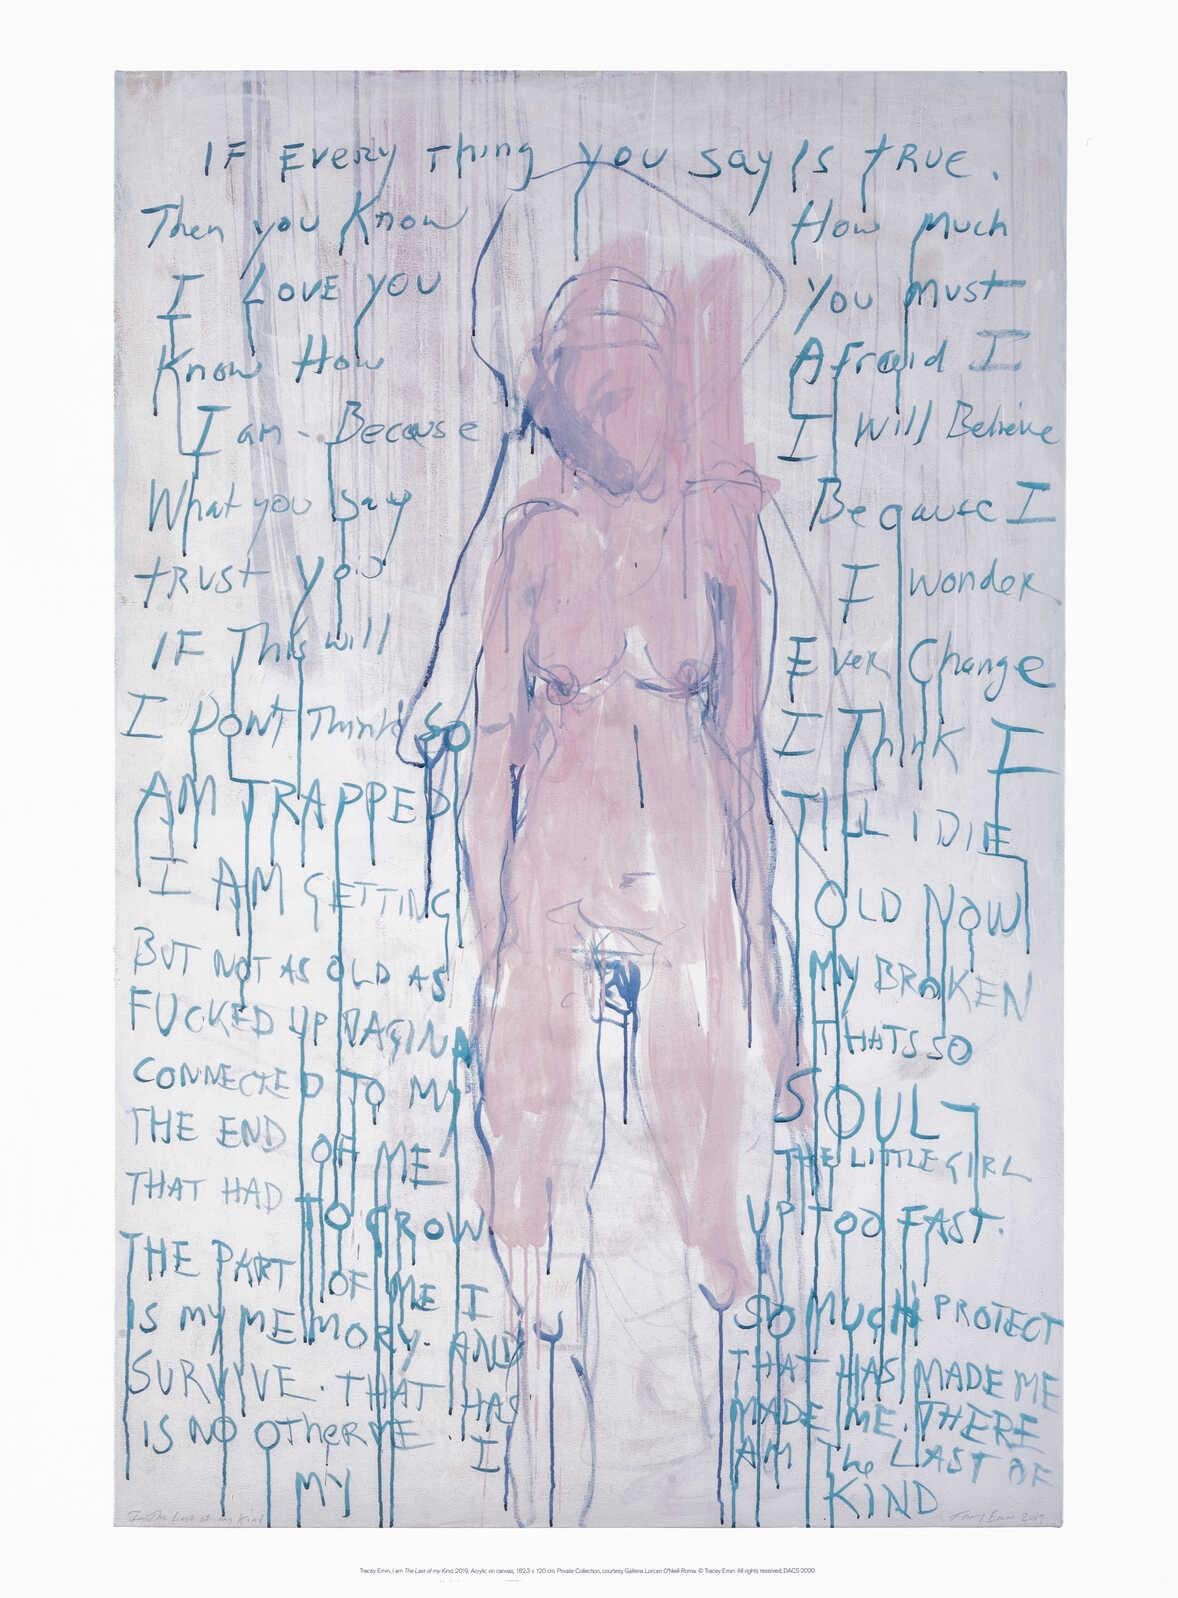 Tracey emin  Abstract Print - Tracey Emin, I Am The Last Of My Kind, 2020